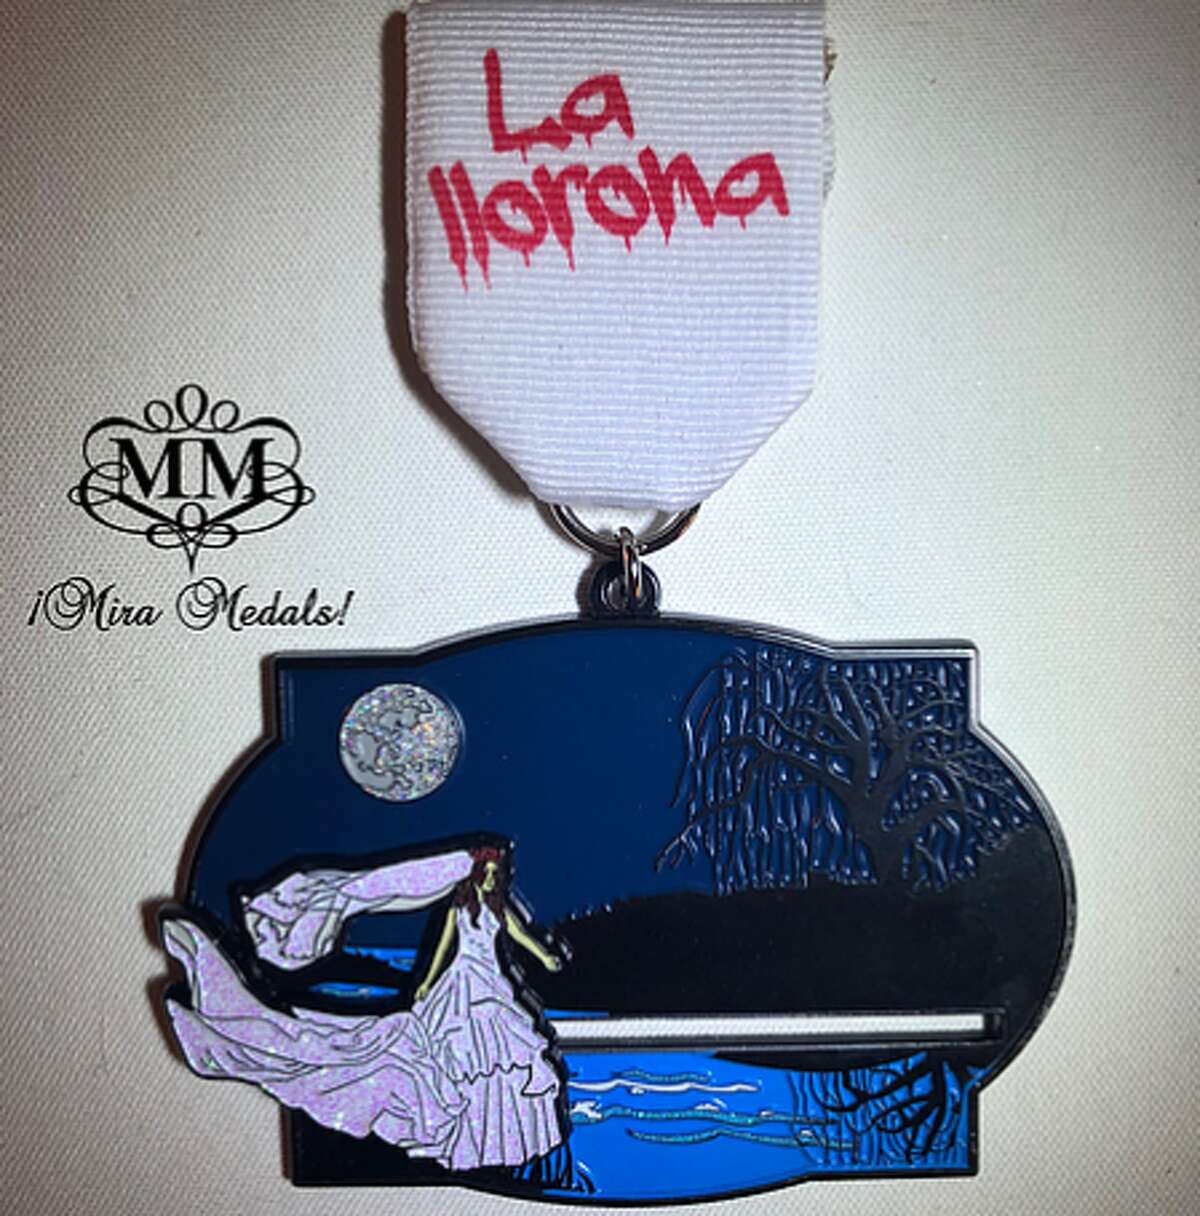 Mira Medals, owned by husband-wife duo Albert and Natasha Gonzales, designed the La Llorona pin for Fiesta 2019 that's packed with fun features.